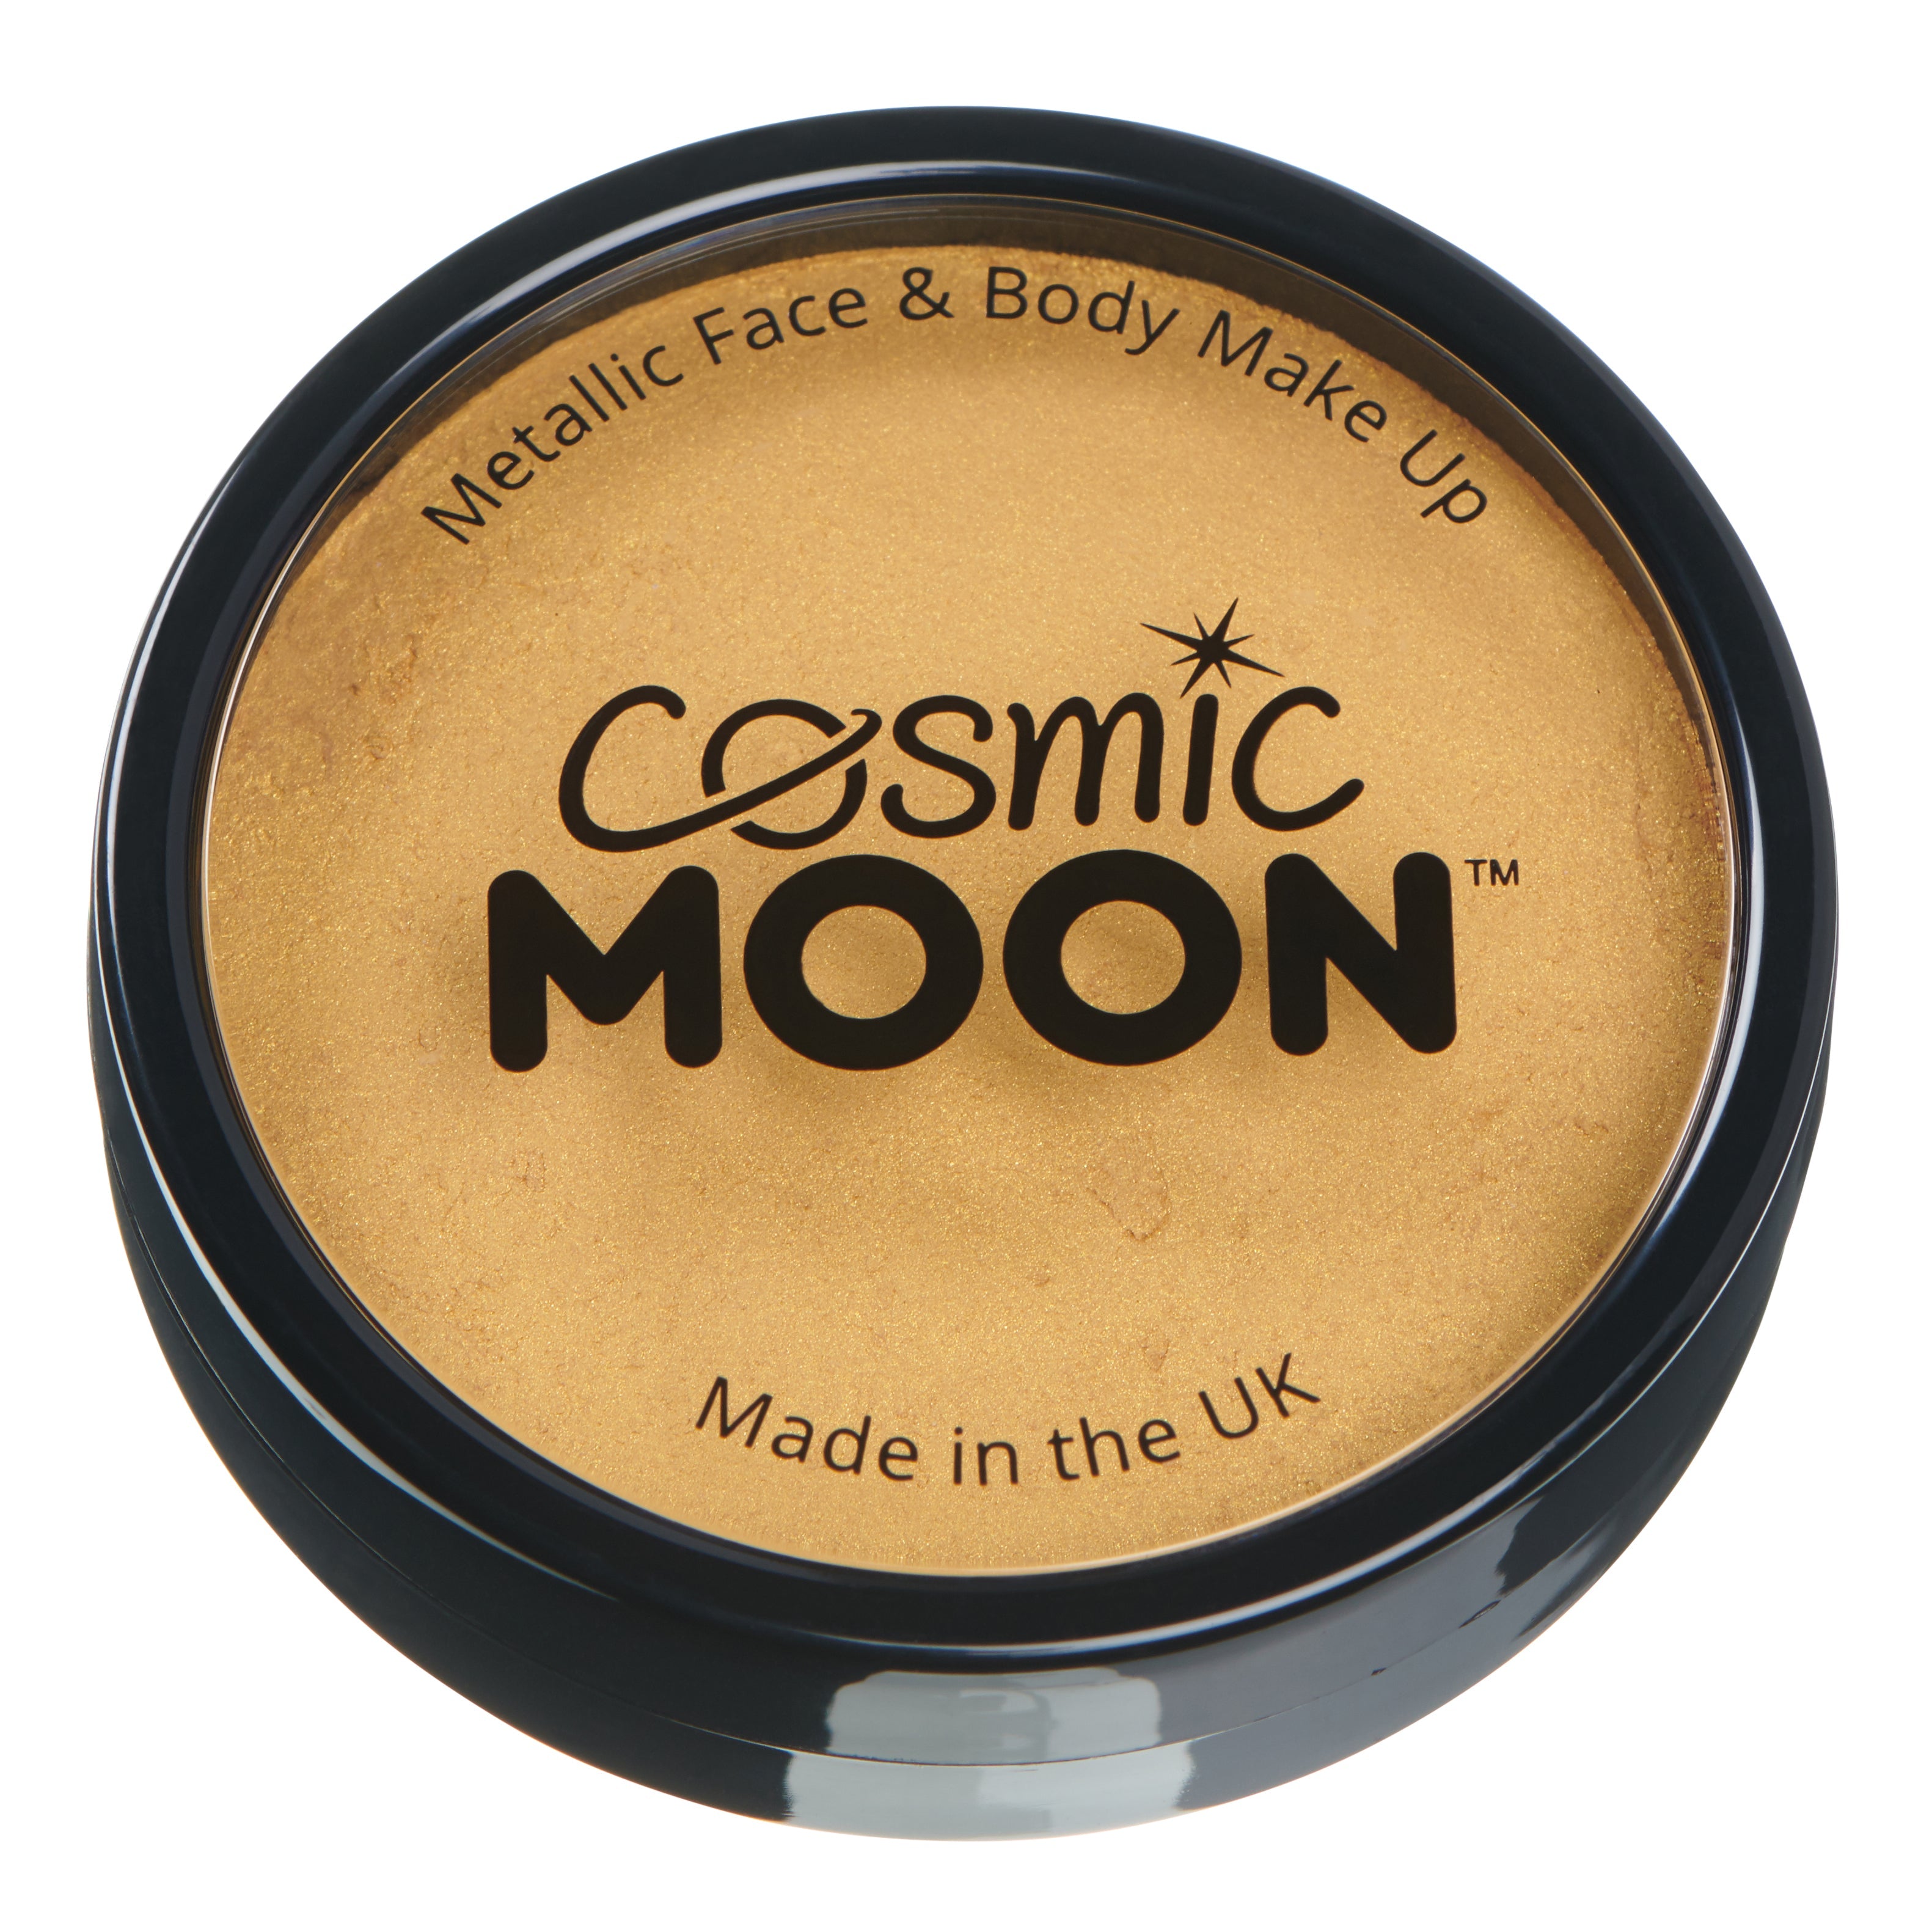 Gold - Metallic Professional Face Paint, 36g. Cosmetically certified, FDA & Health Canada compliant, cruelty free and vegan.